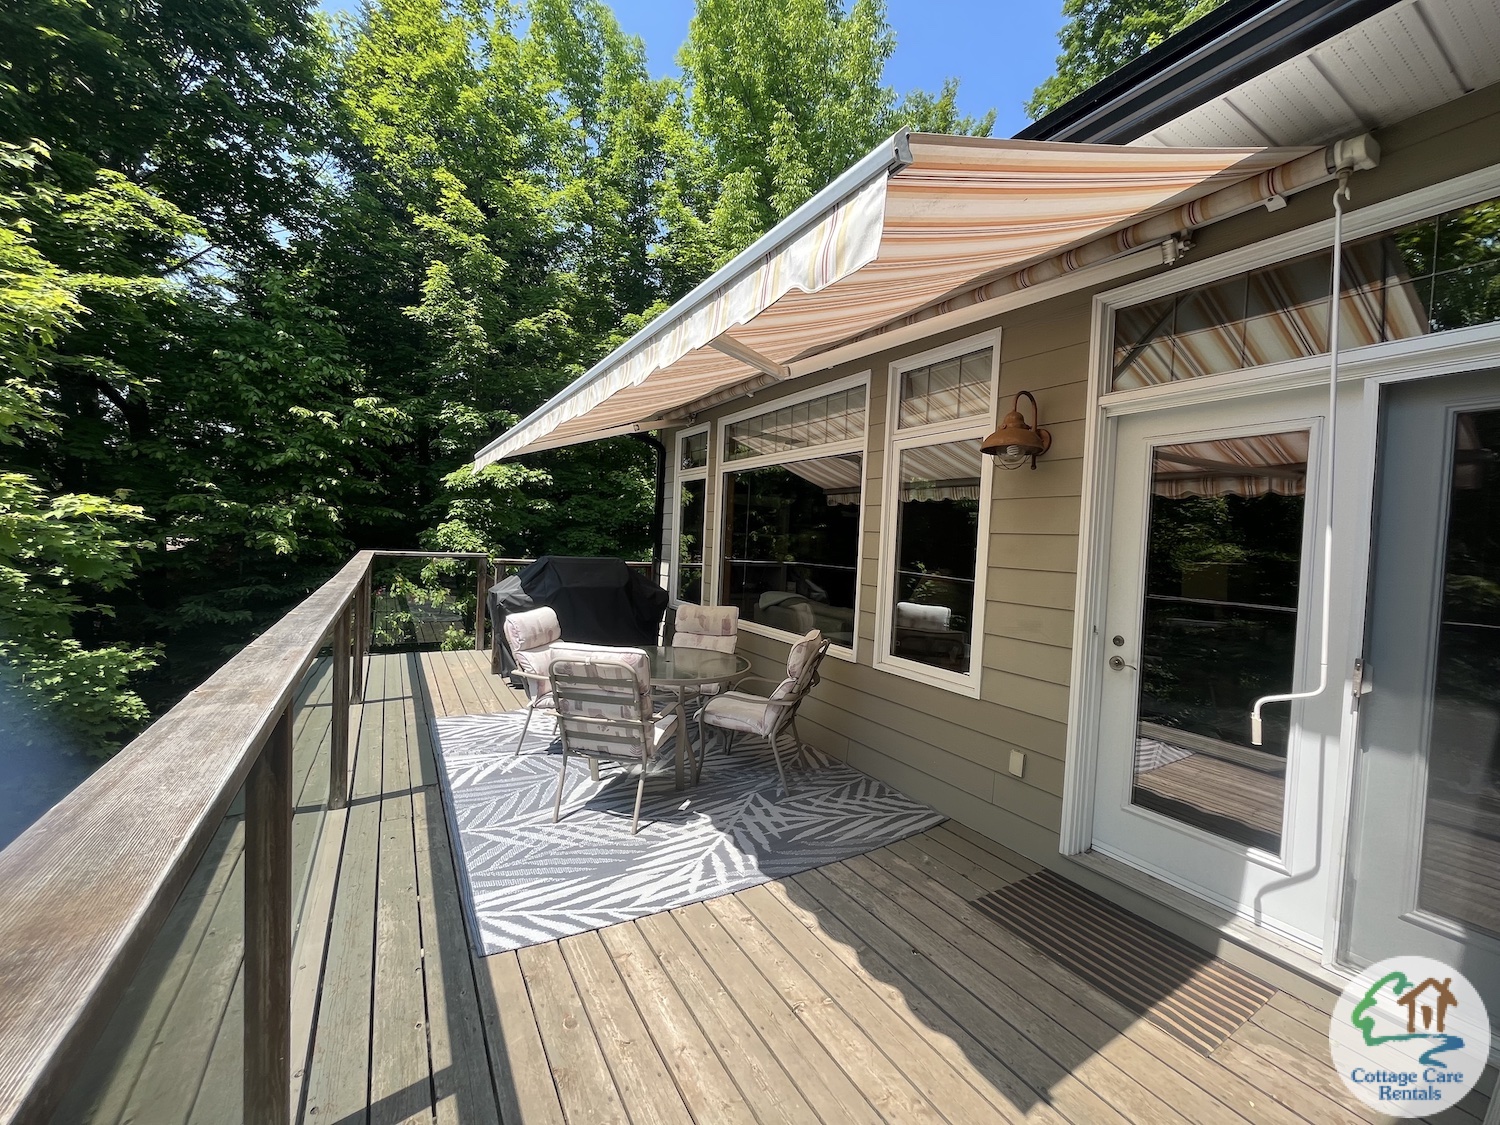 Miskwabi Lake Meadow Vale - Deck with Awning and BBQ